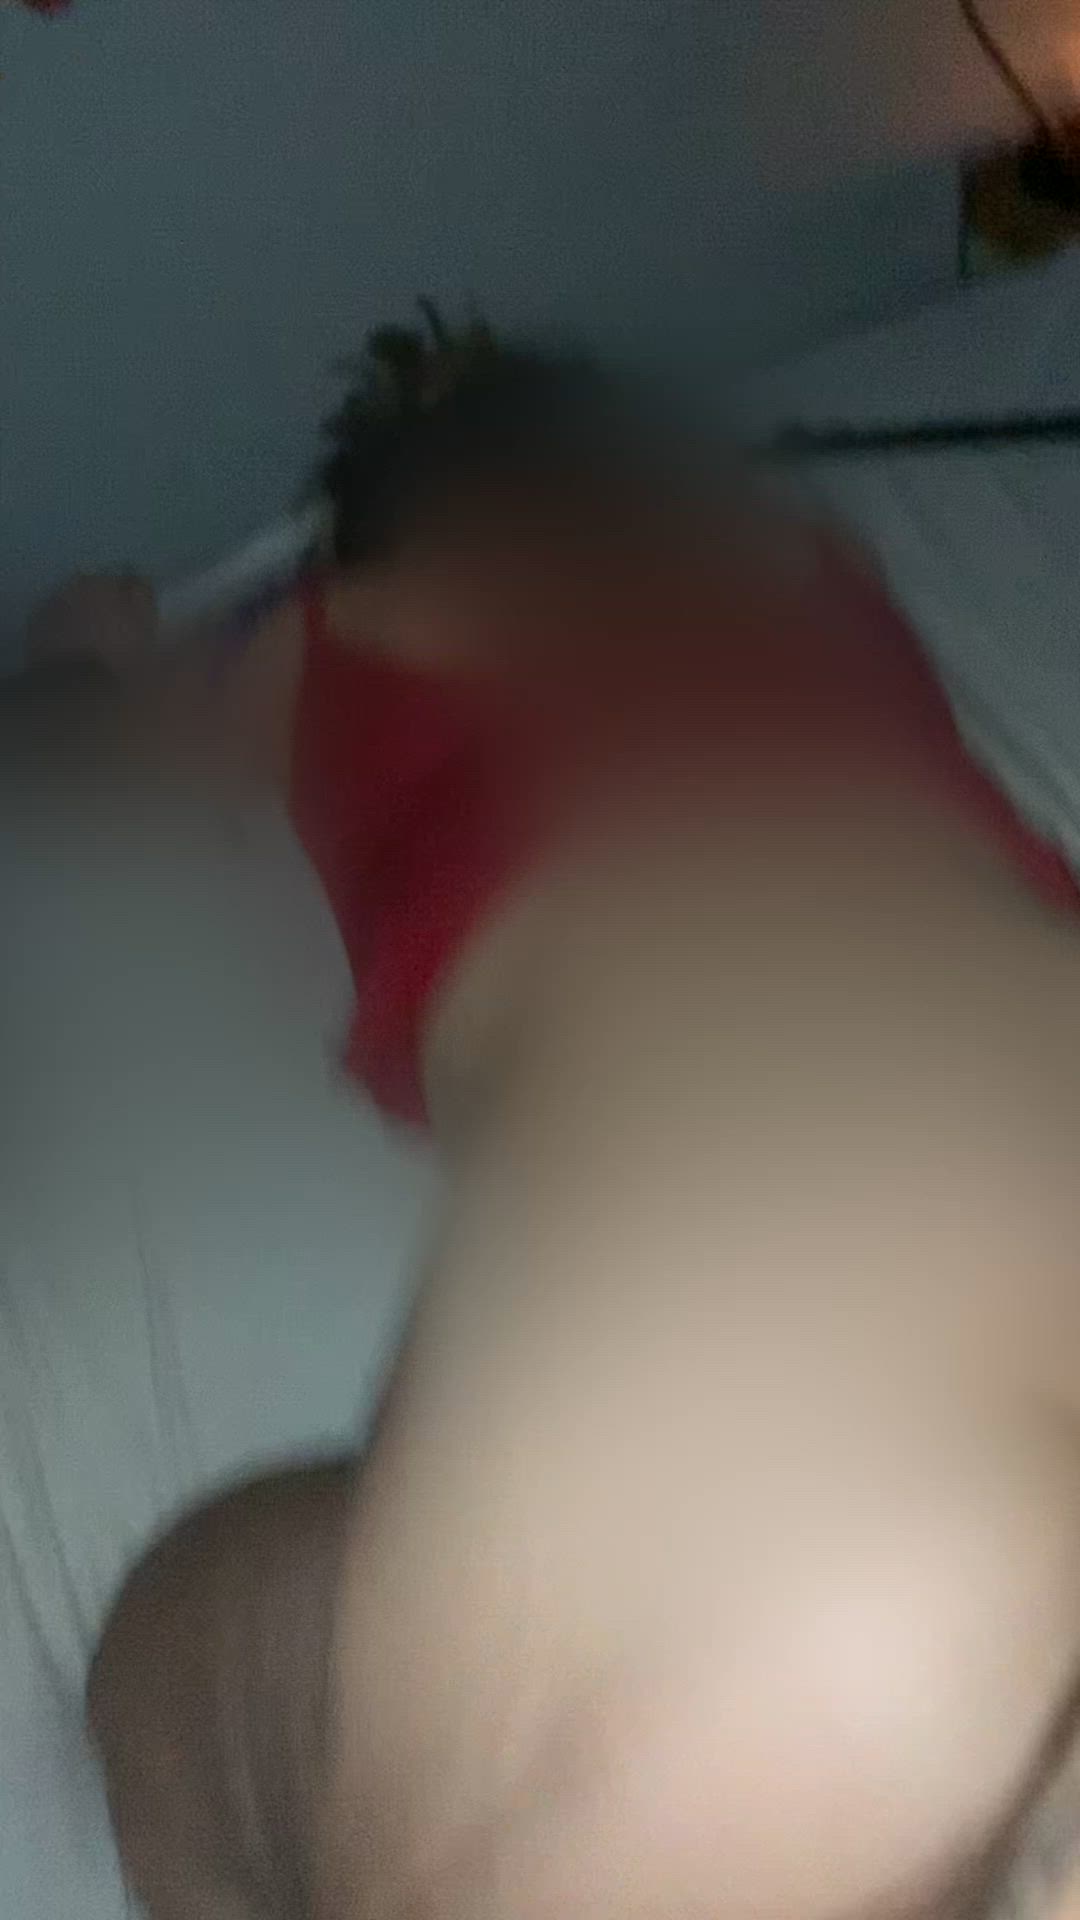 Amateur porn video with onlyfans model untoldcouple <strong>@untold.couple</strong>